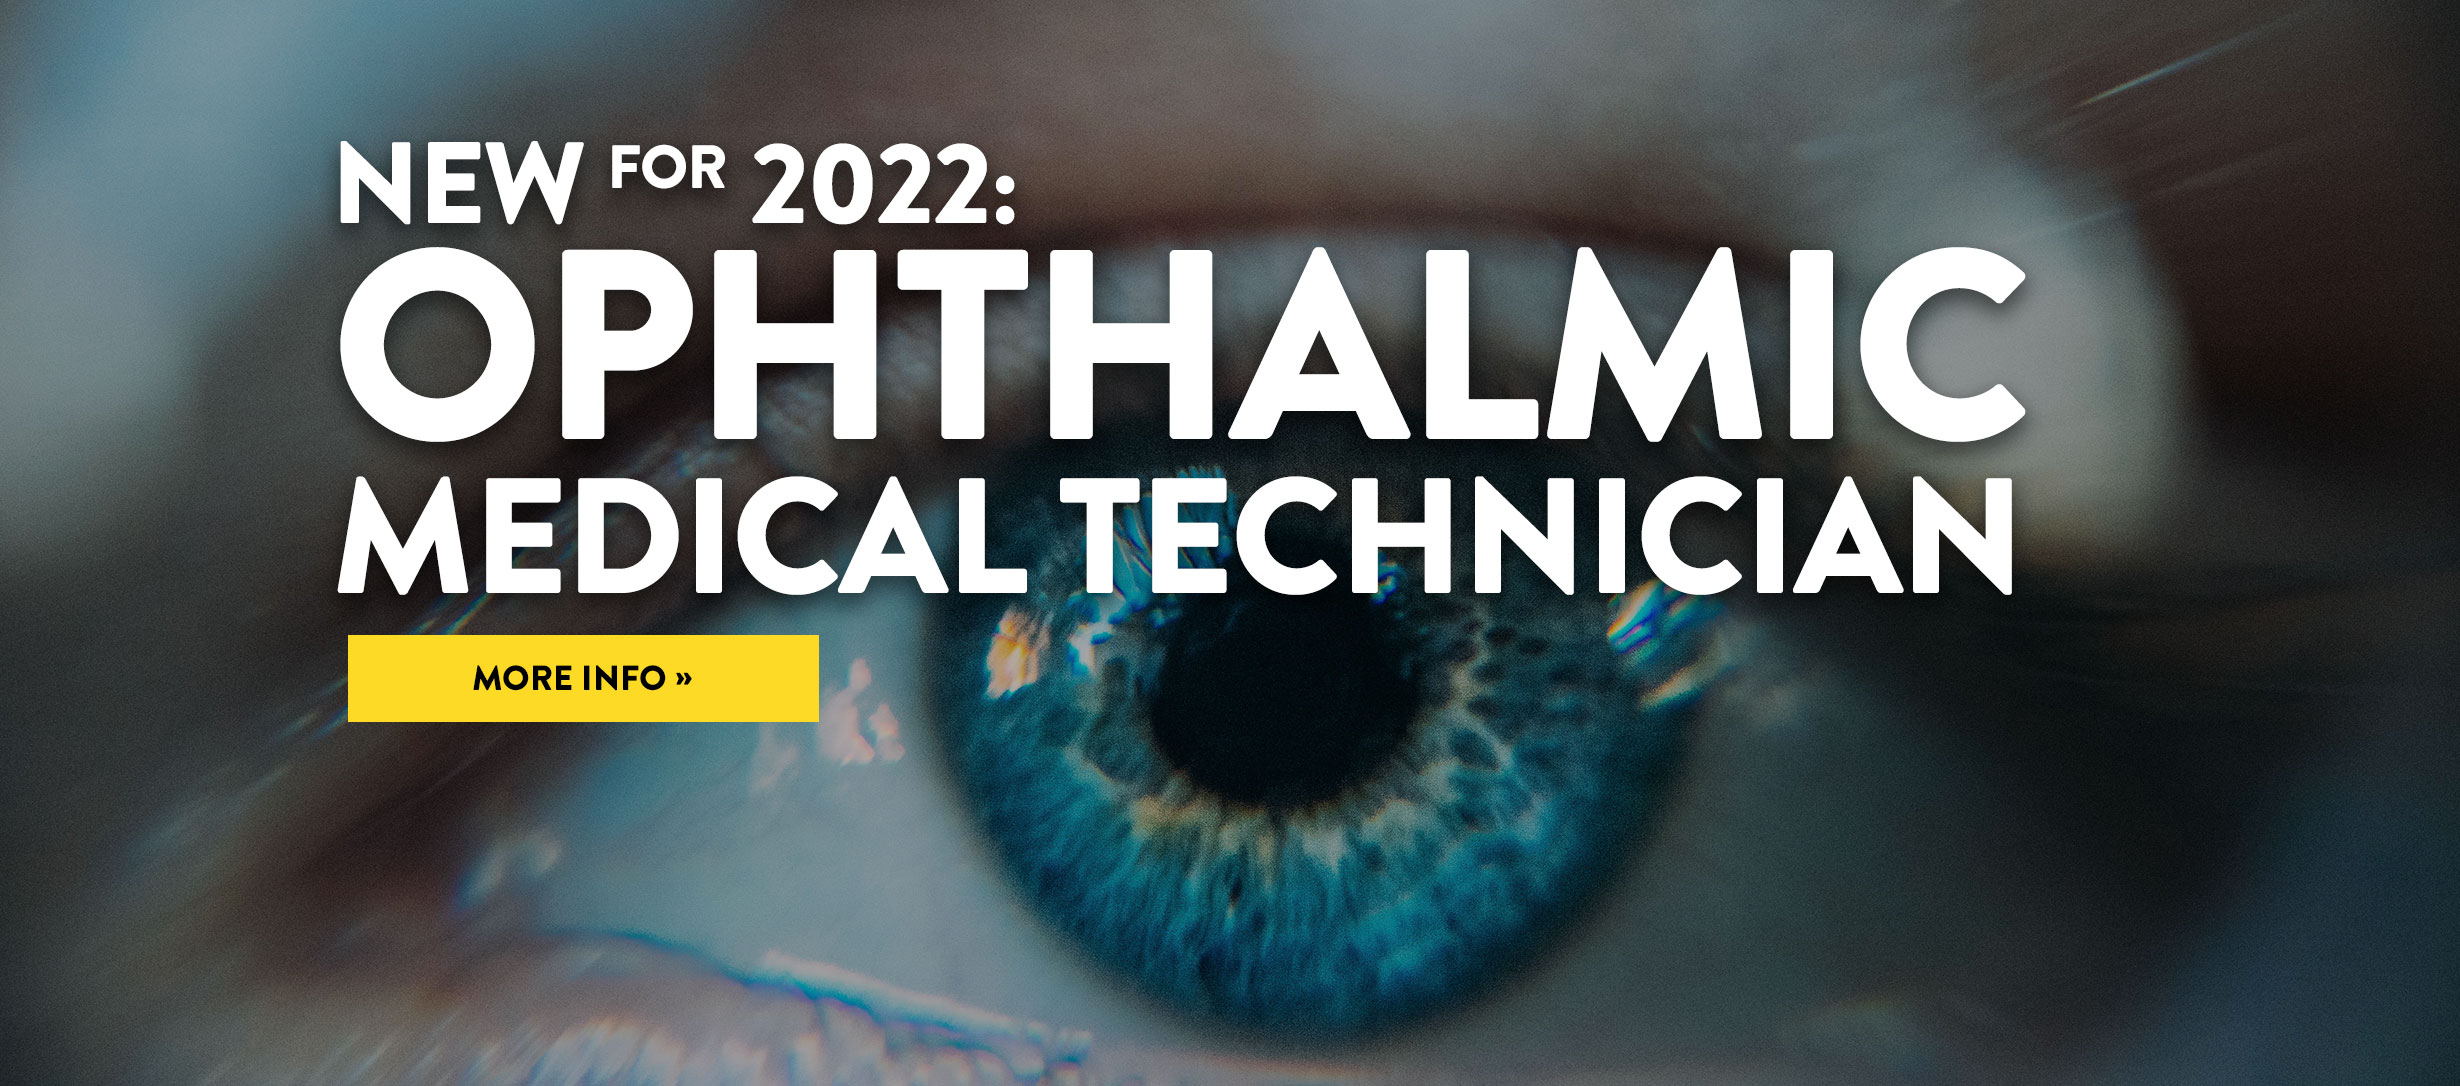 New for 2022: Ophthalmic Medical Technician